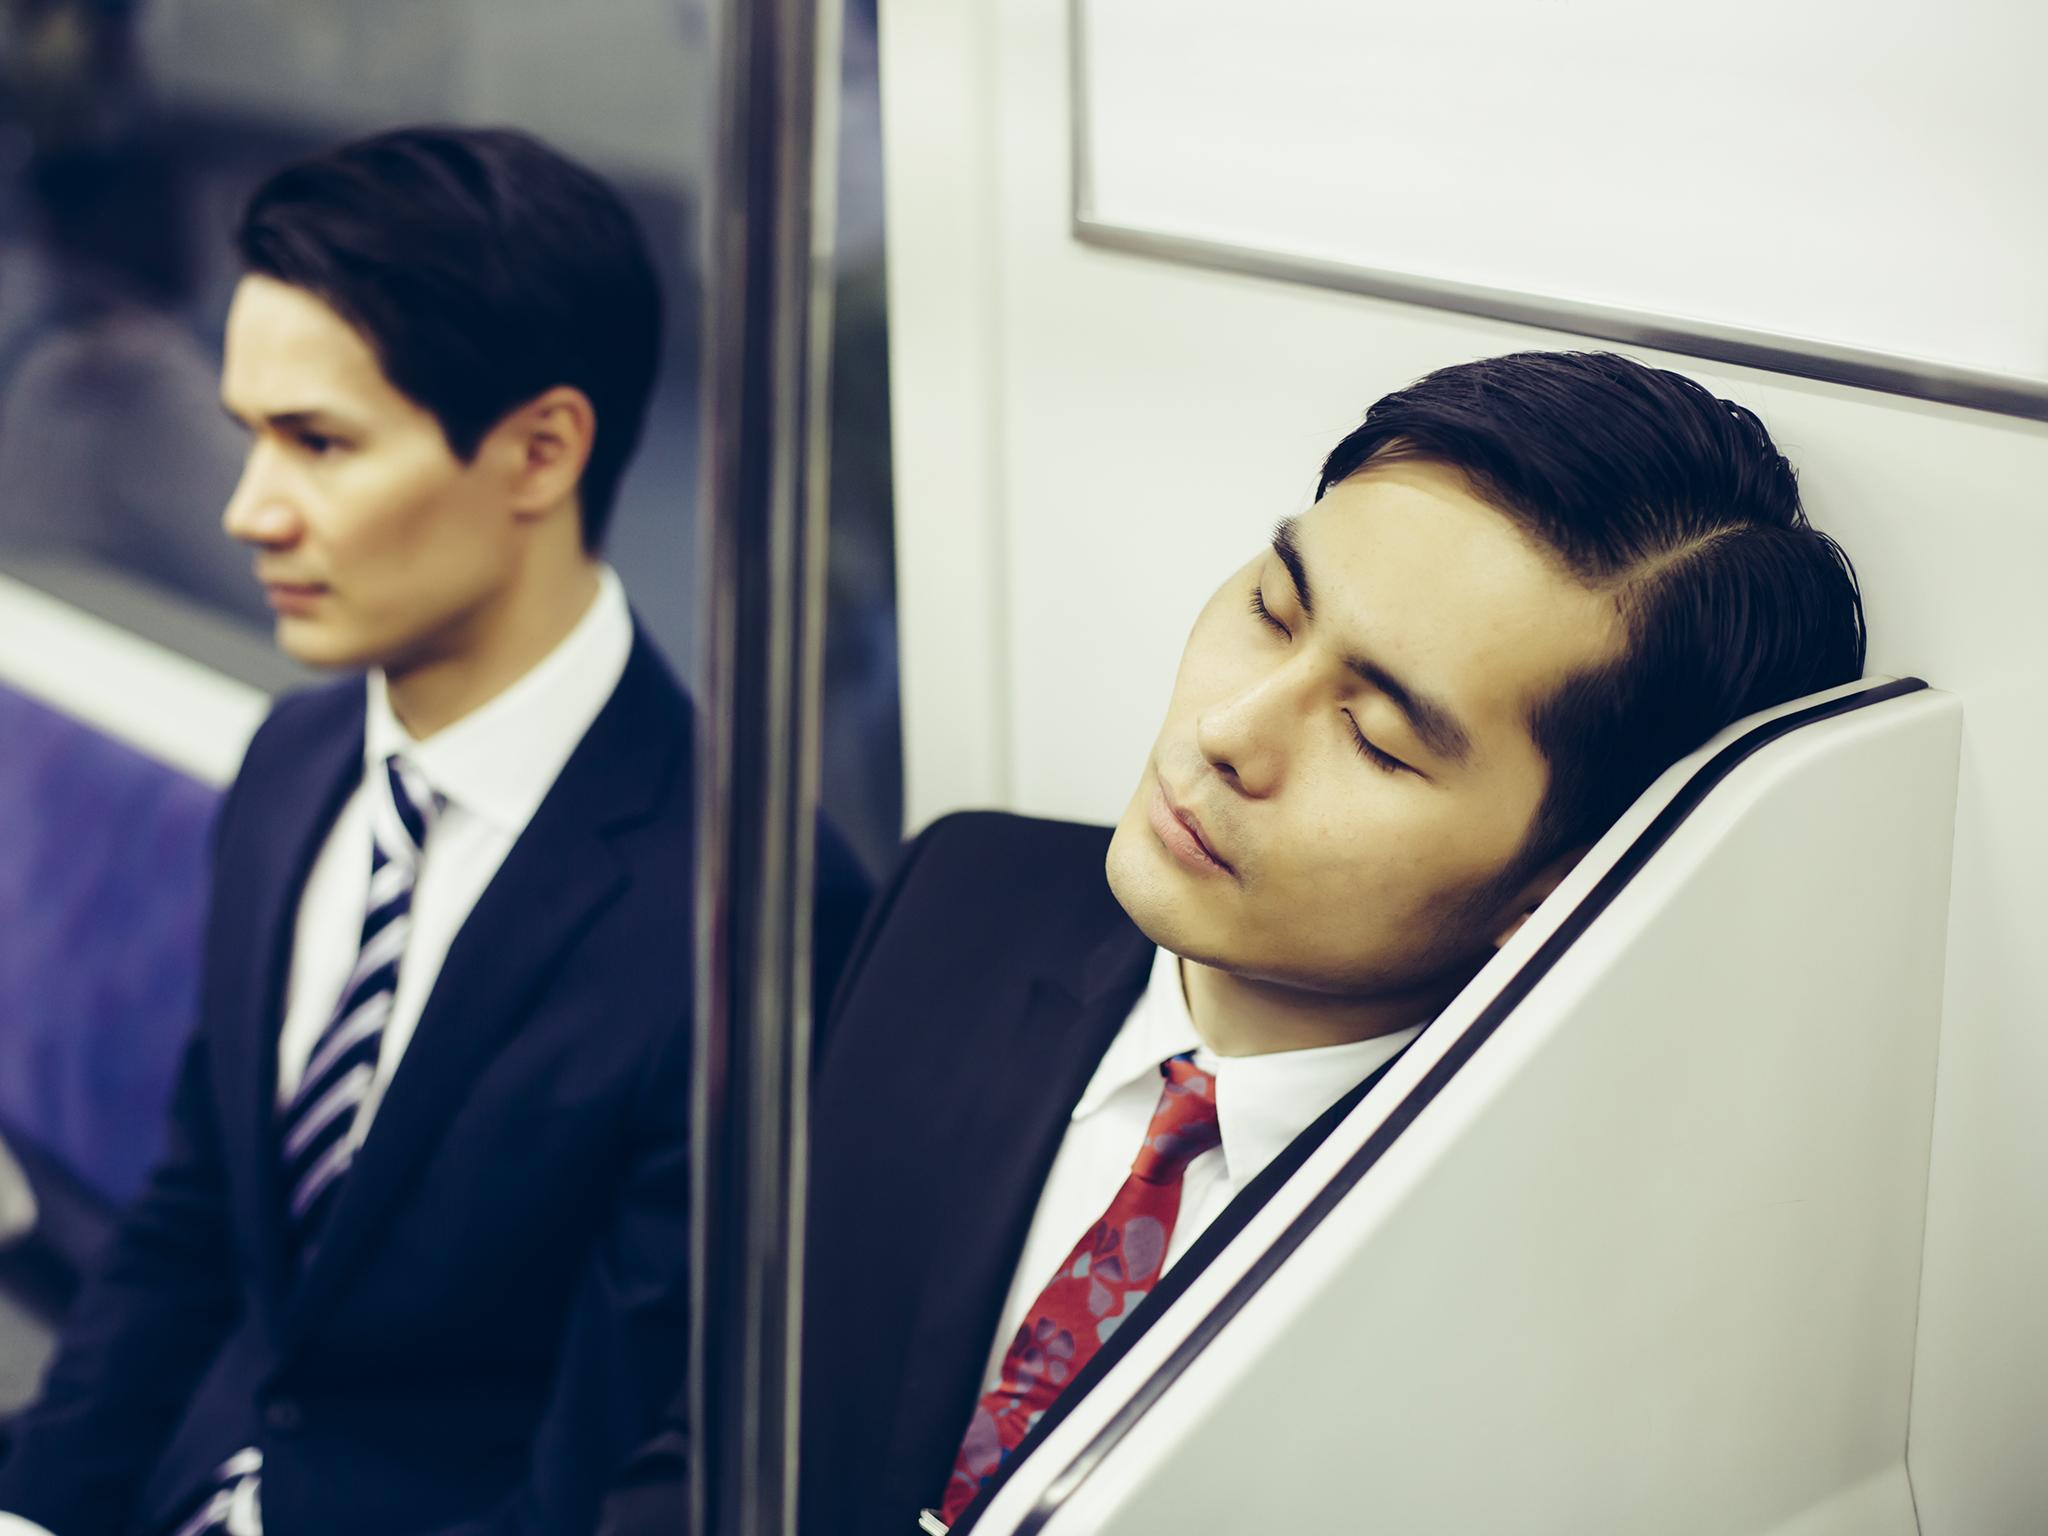 Many men in Japan blame their lack of sleep on excessive working hours